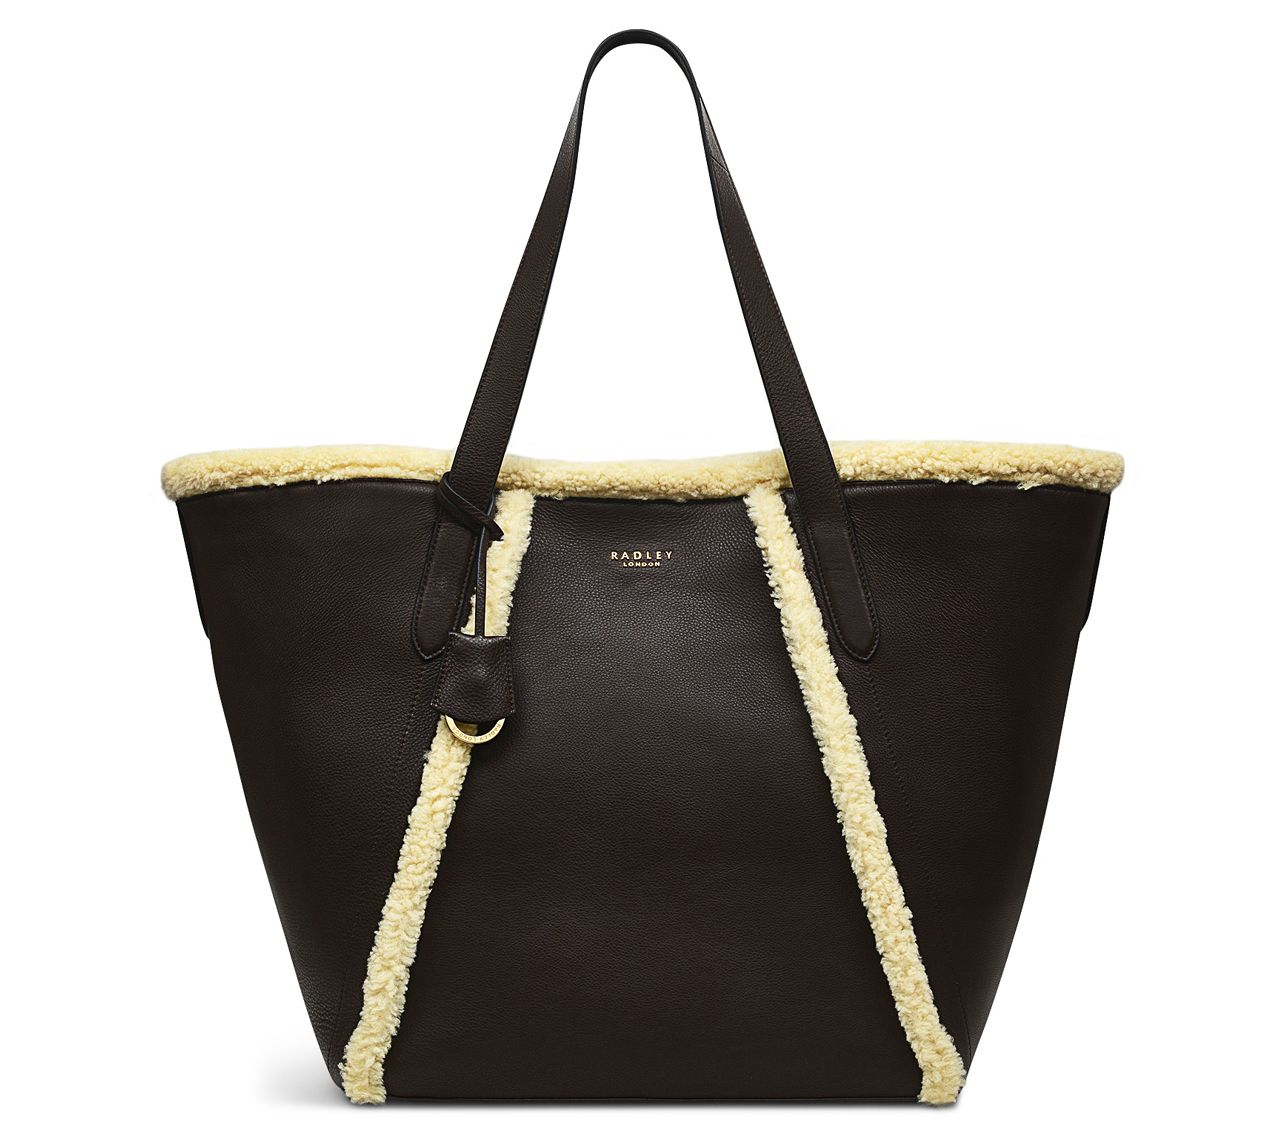 RADLEY London Park Place Shearling - Large Leather Tote Bag 